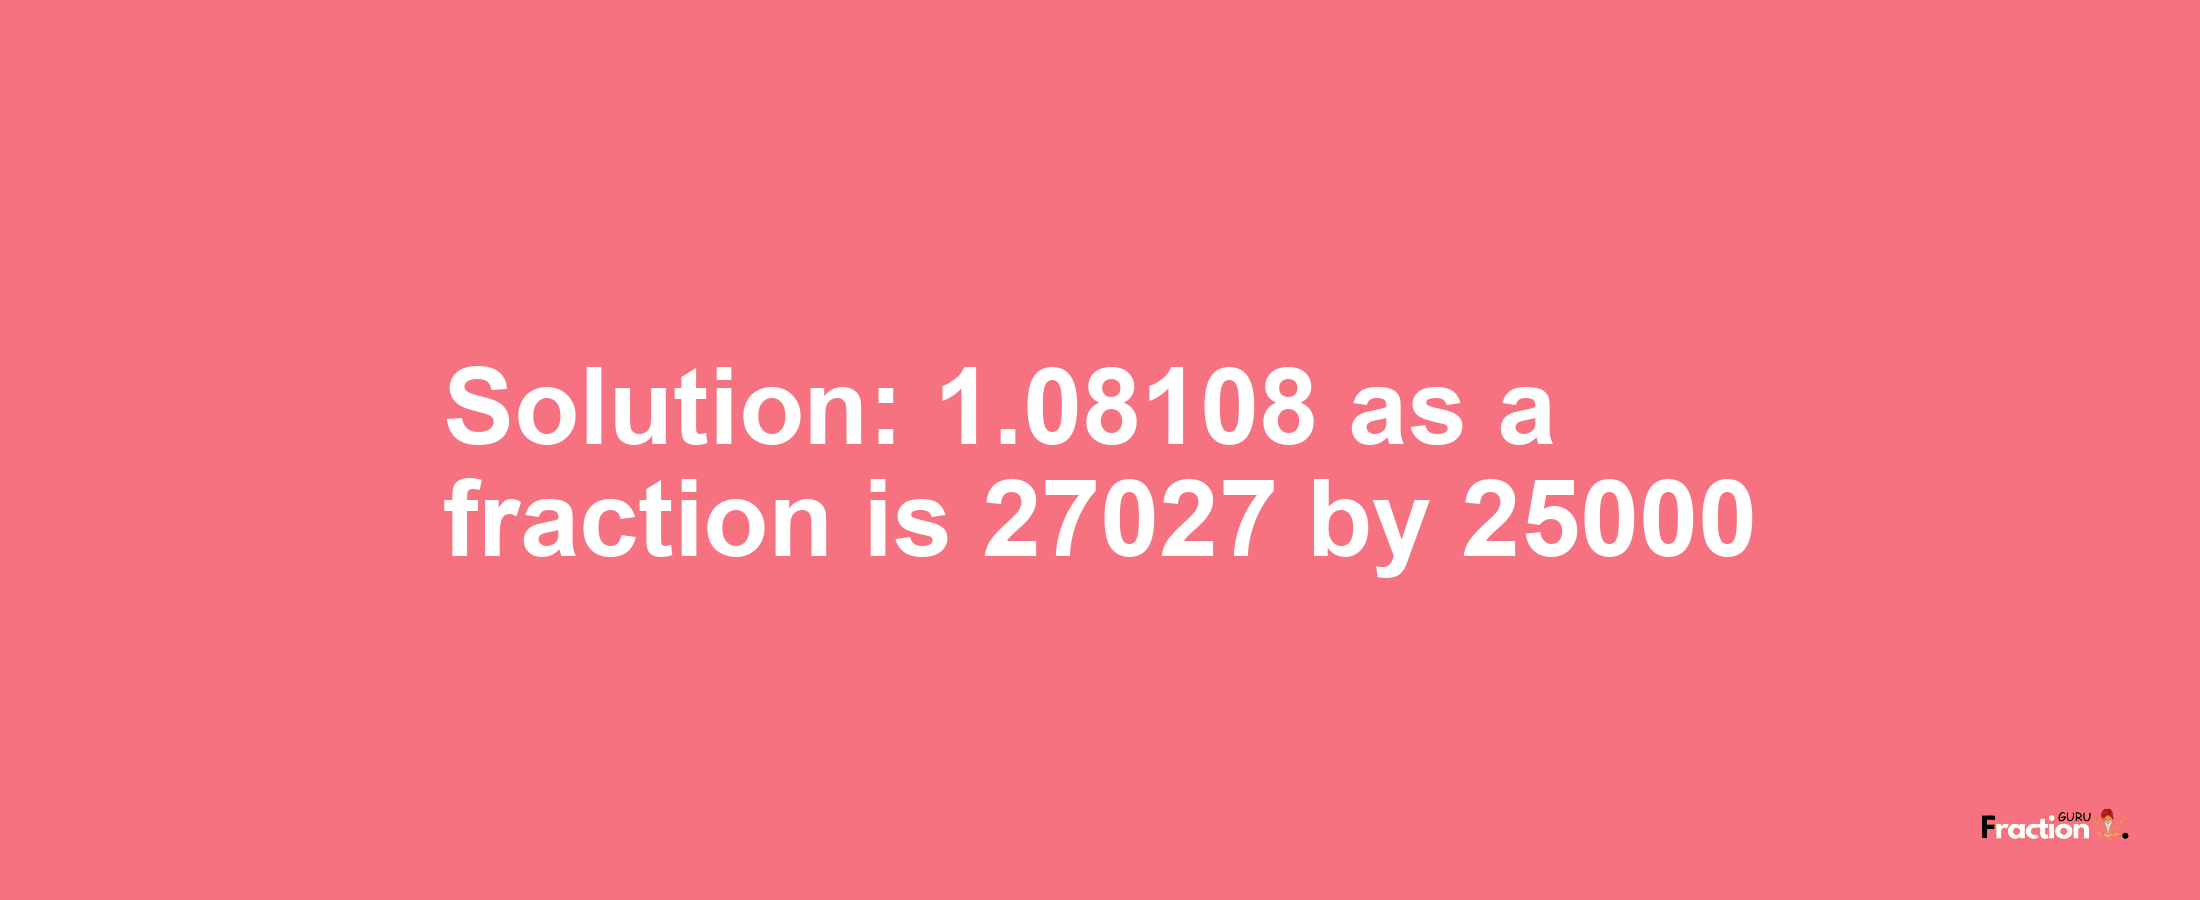 Solution:1.08108 as a fraction is 27027/25000